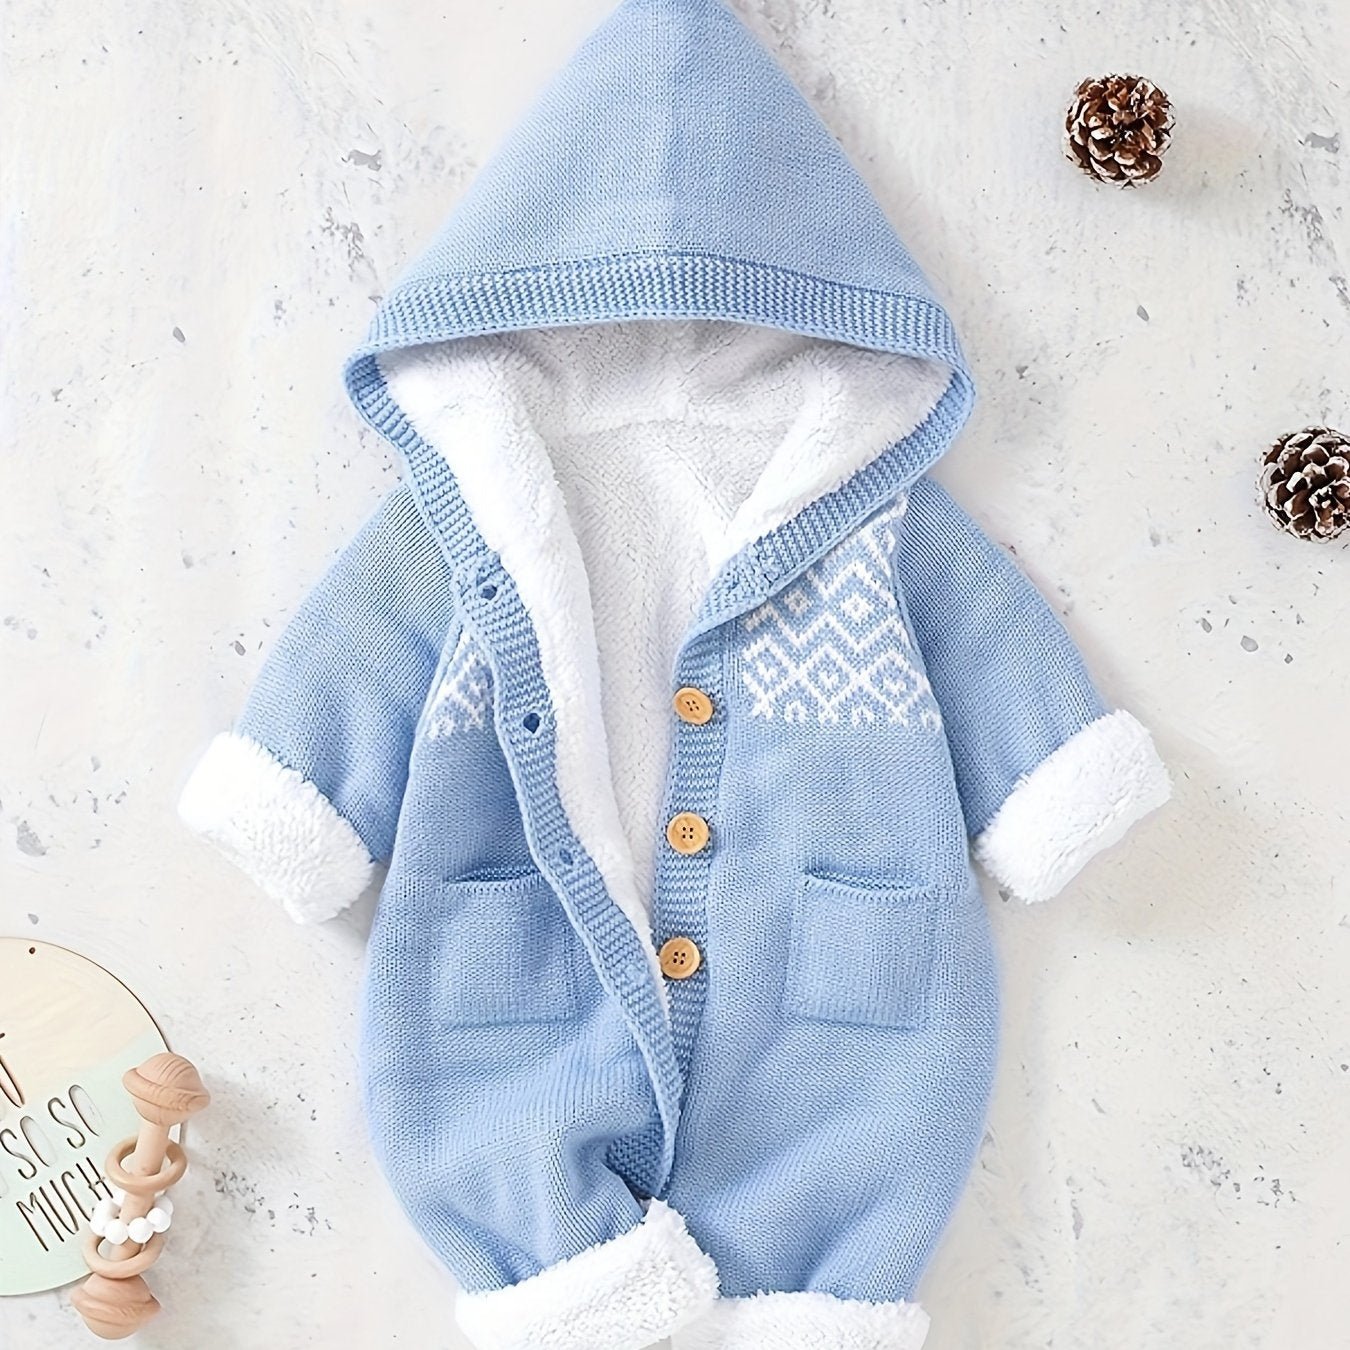 Newborn Baby's Knit Hooded Jumpsuit, Warm Long Sleeves Hooded Button Down Onesie For Winter/fall - Ammpoure Wellbeing